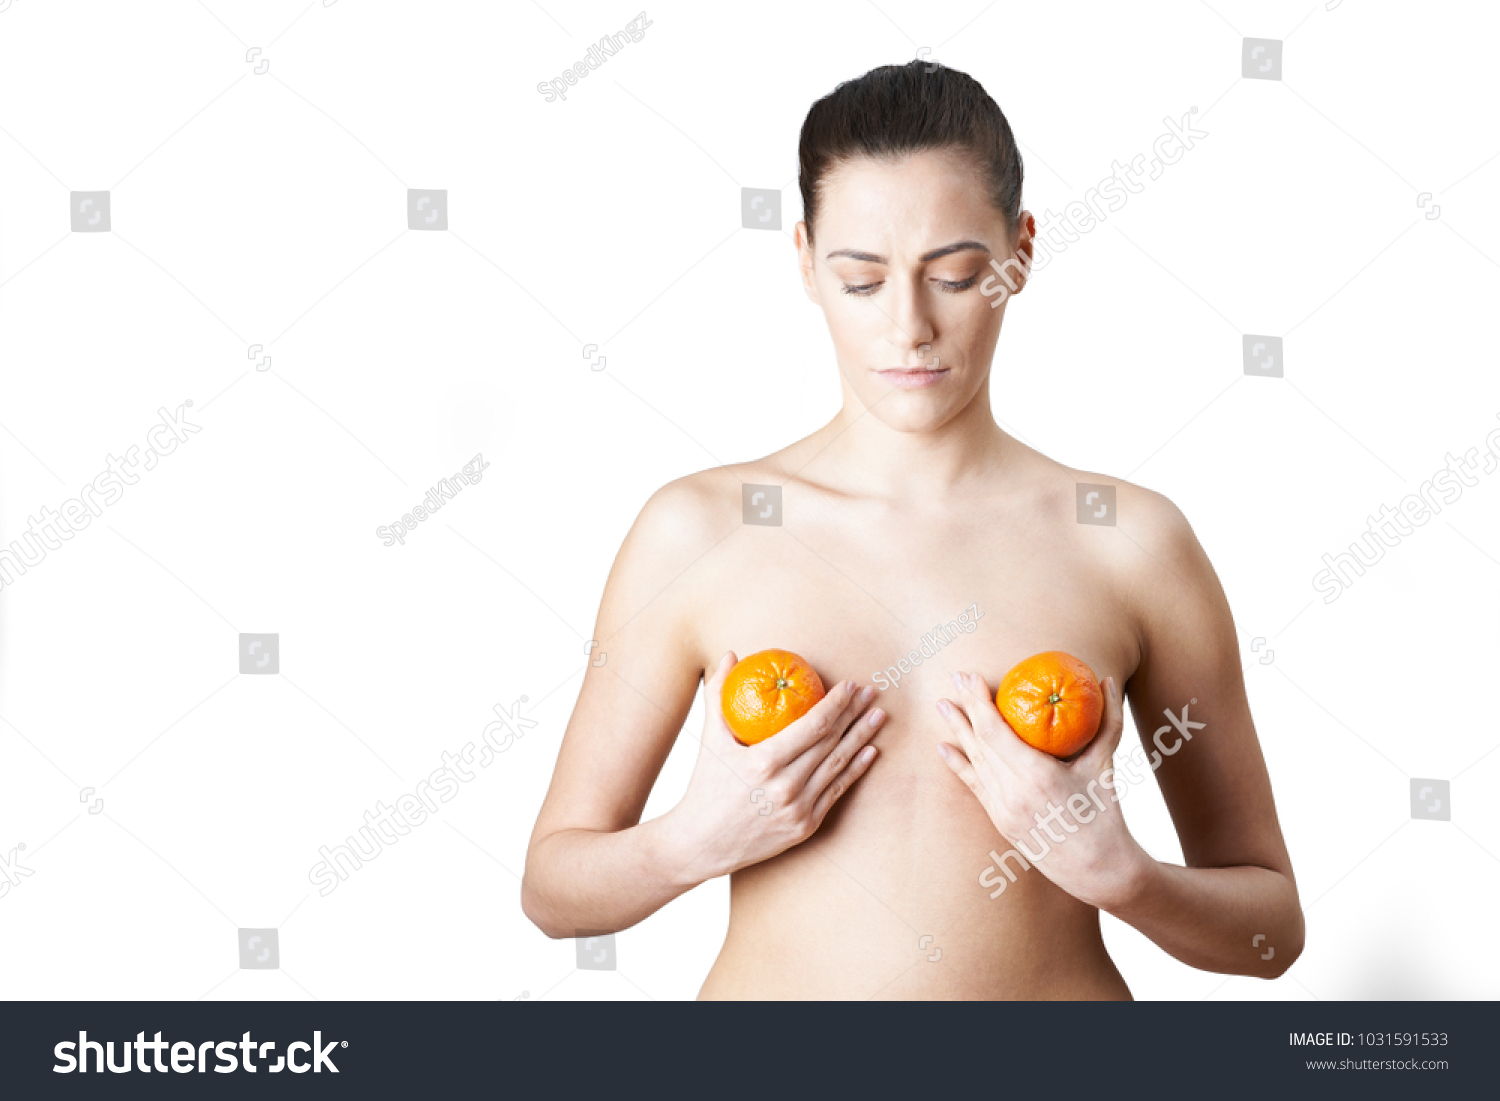 Conceptual Image To Illustrate Breast Enlargement Surgery #1031591533